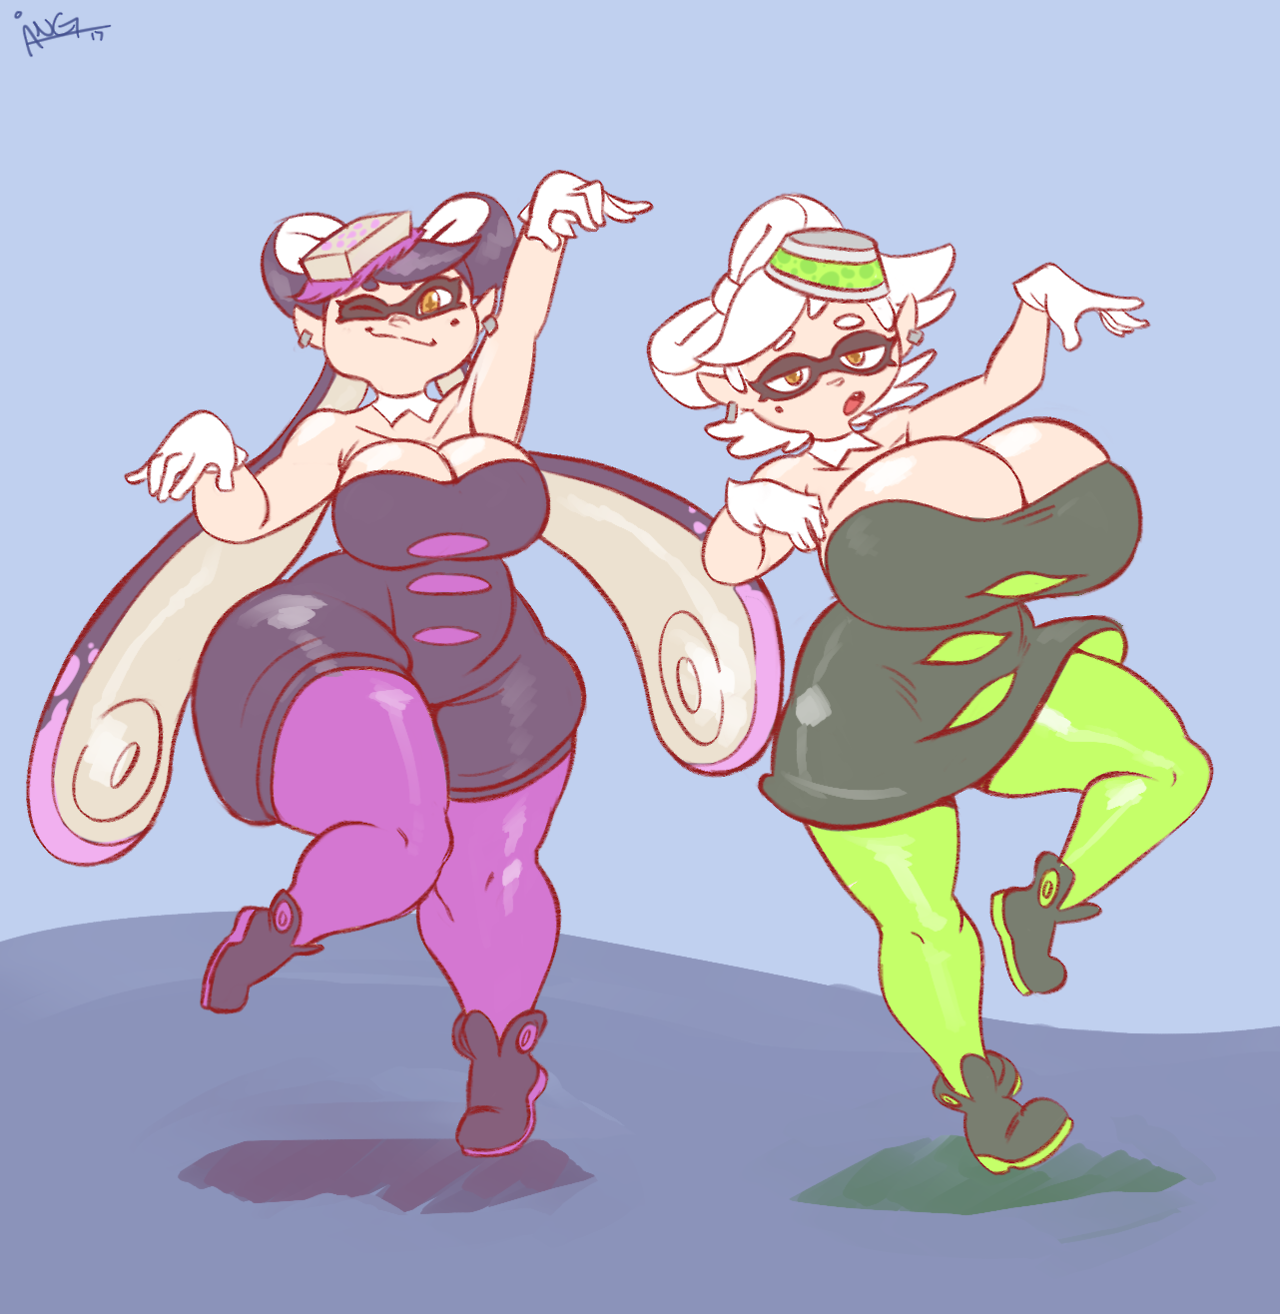 angstrom-nsfw:Commission of Callie and Marie, the famous Squid Sisters! Always wanted